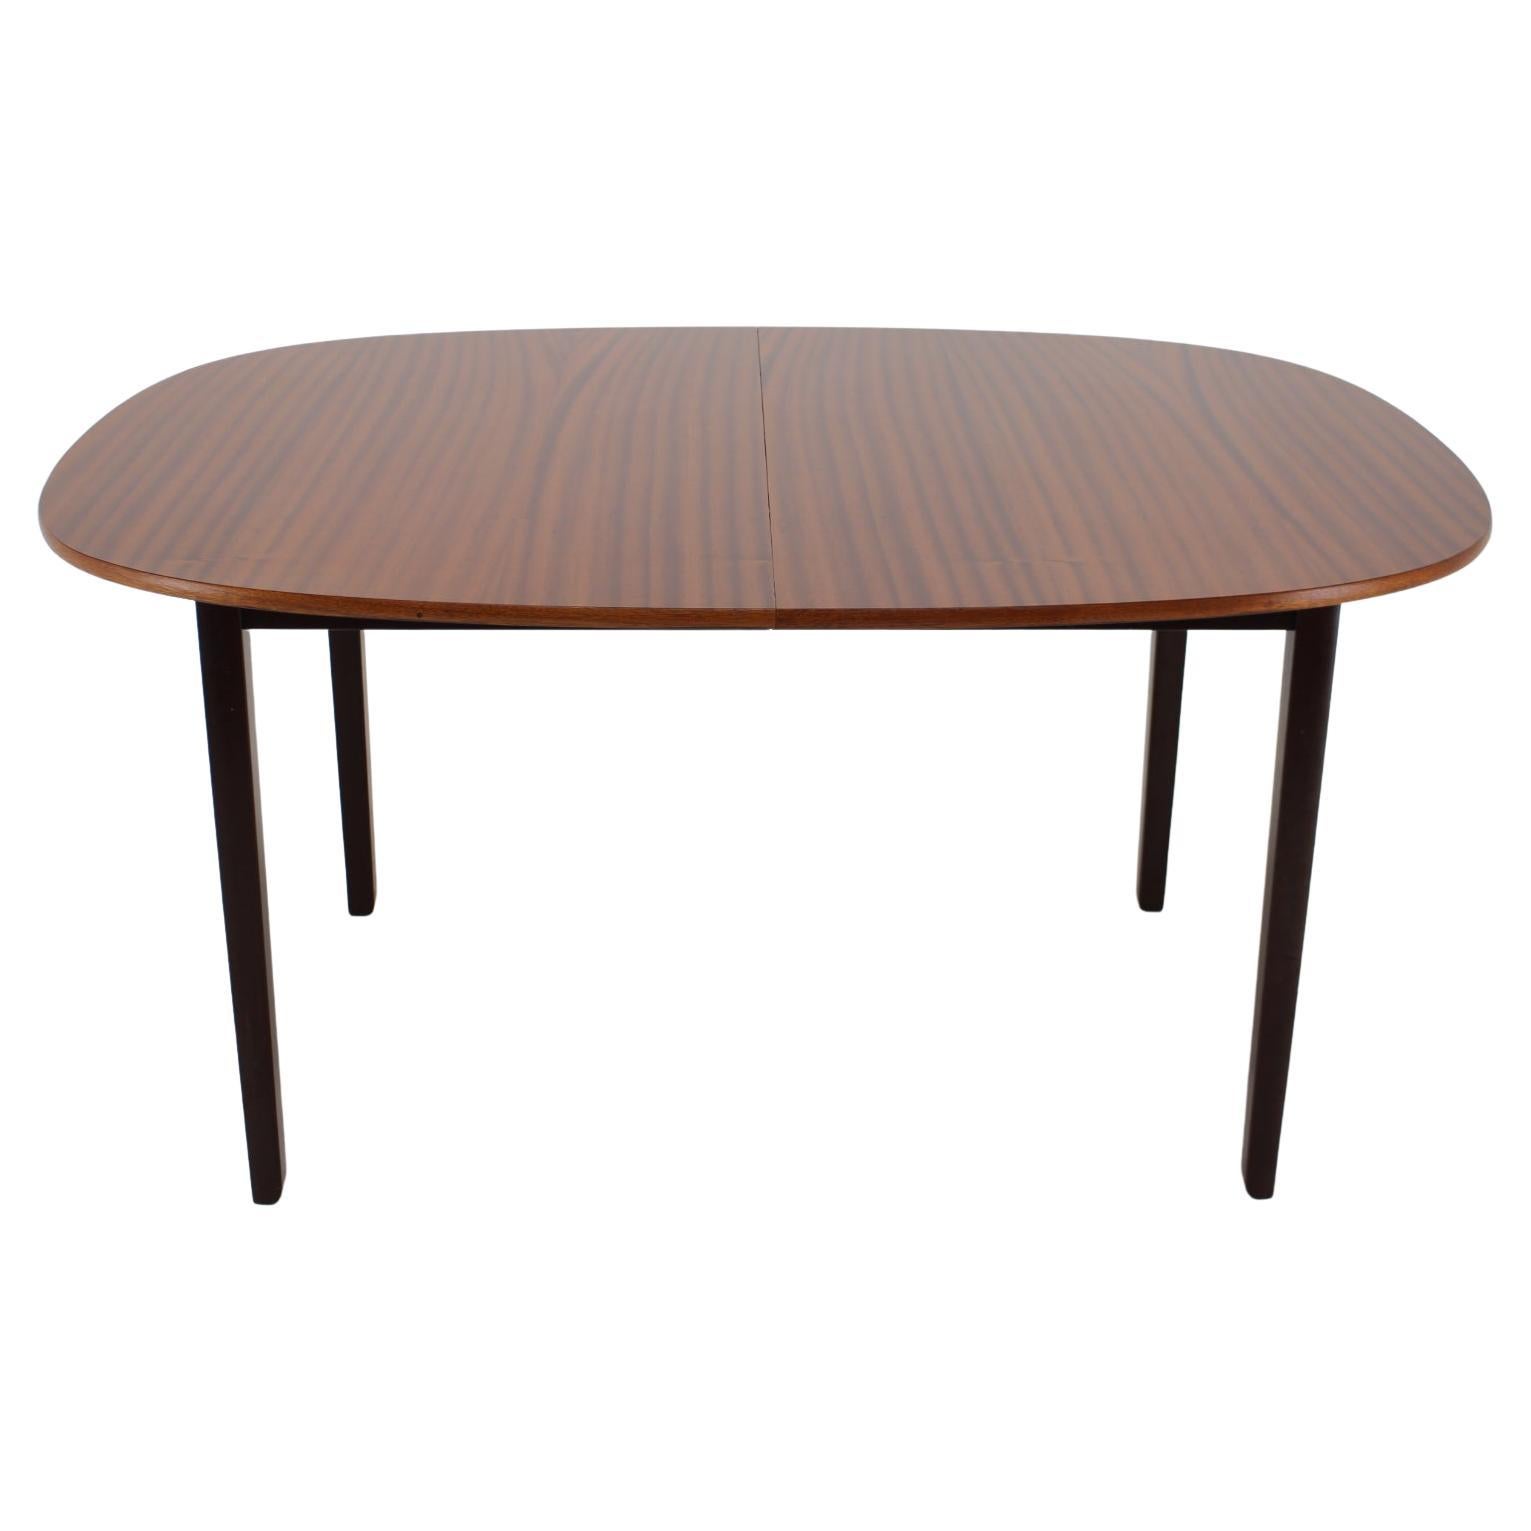 1960s Ole Wanscher Extendable Mahogany Dining Table by P. Jeppesen For Sale